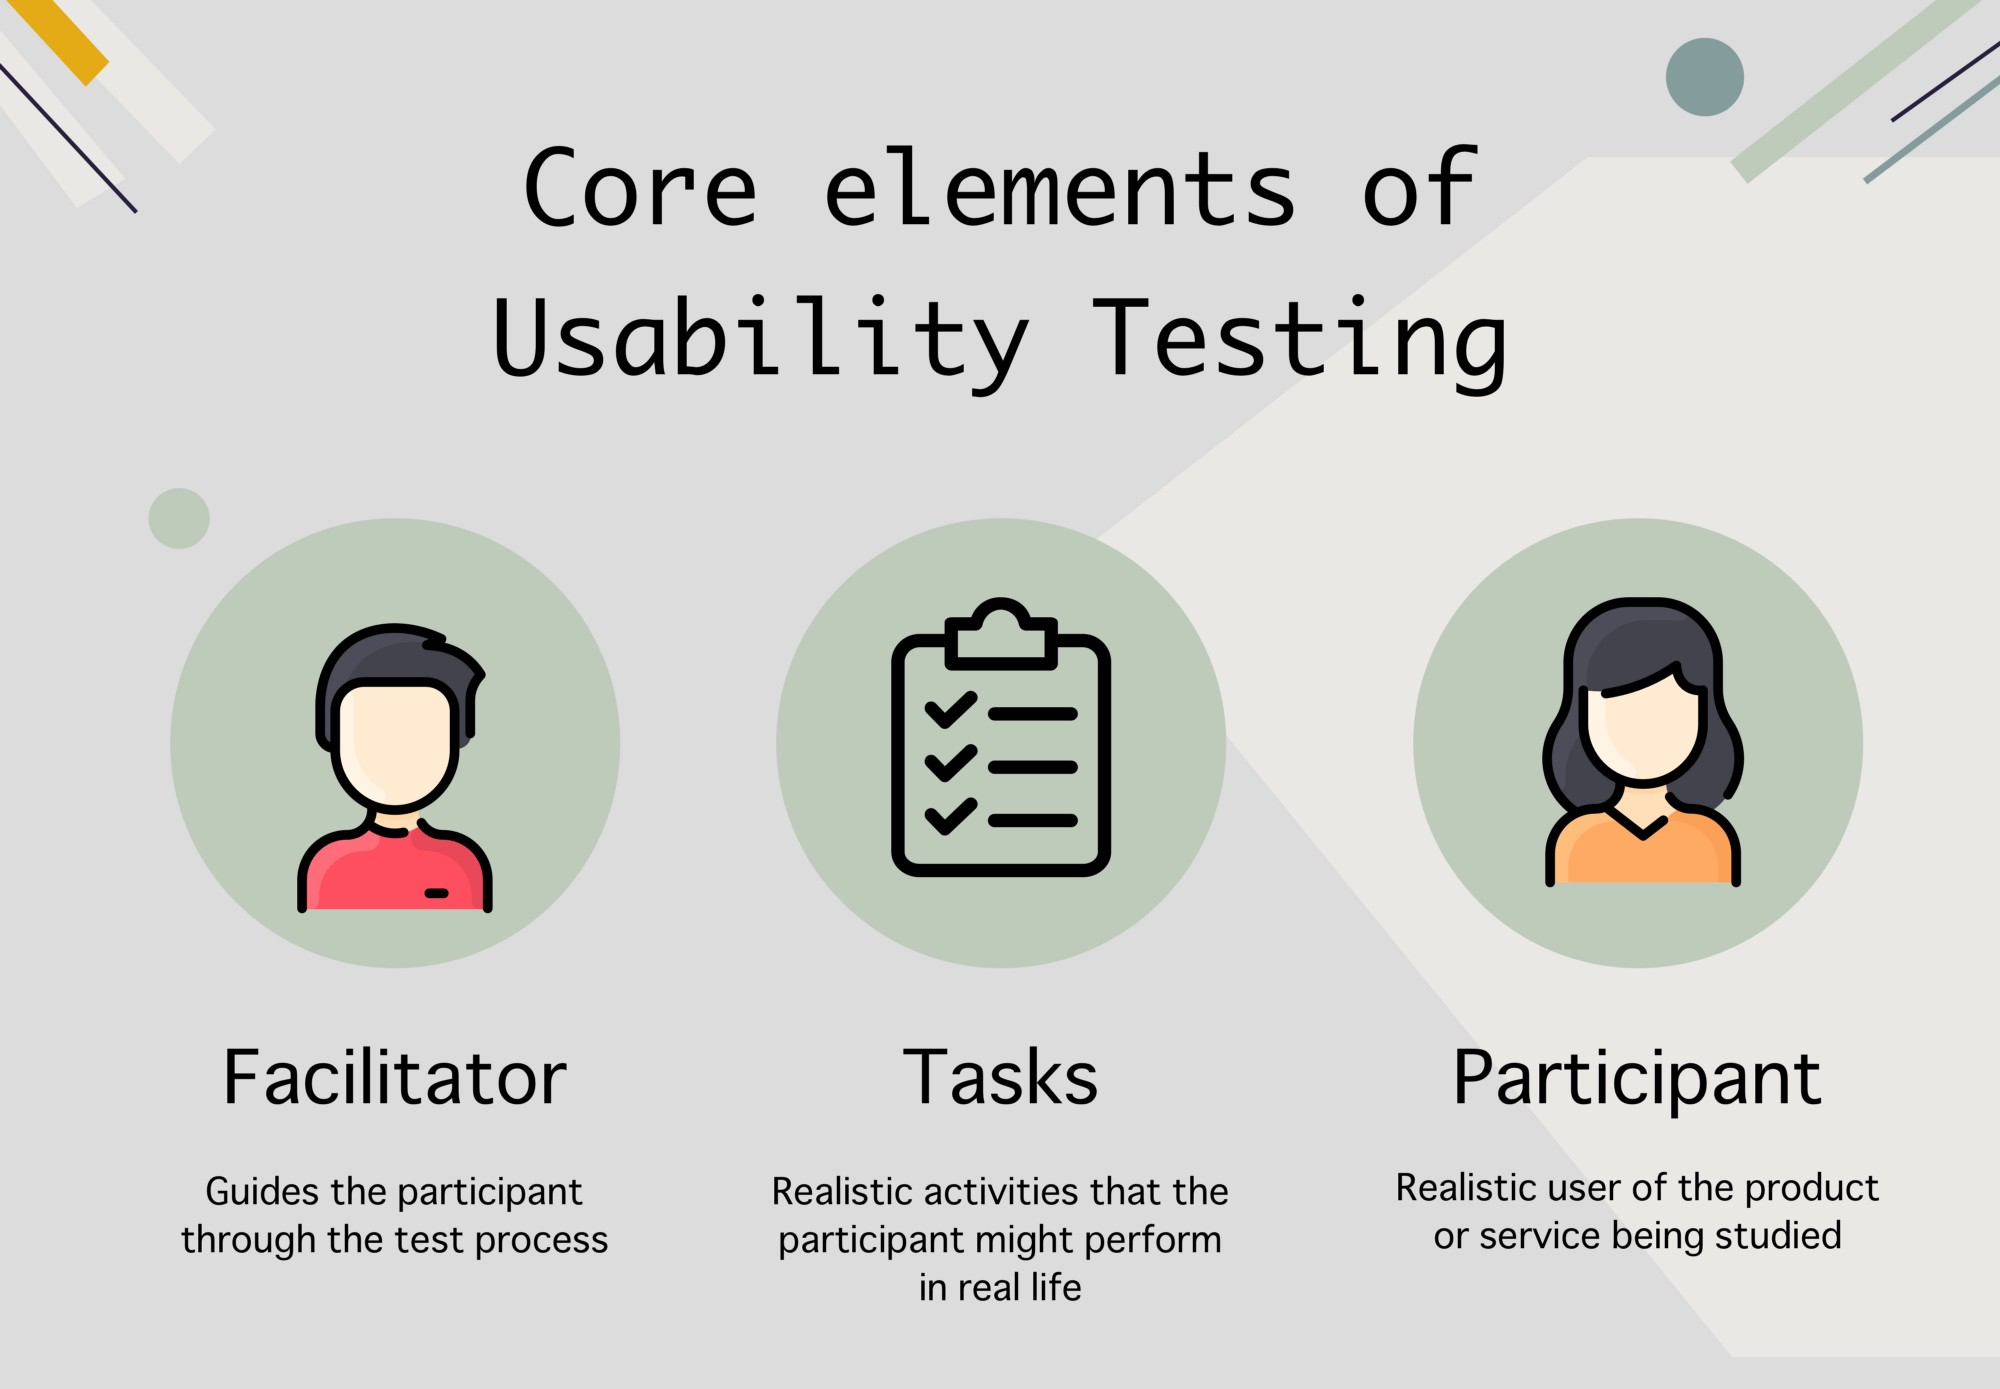 Core elements of Usability Testing